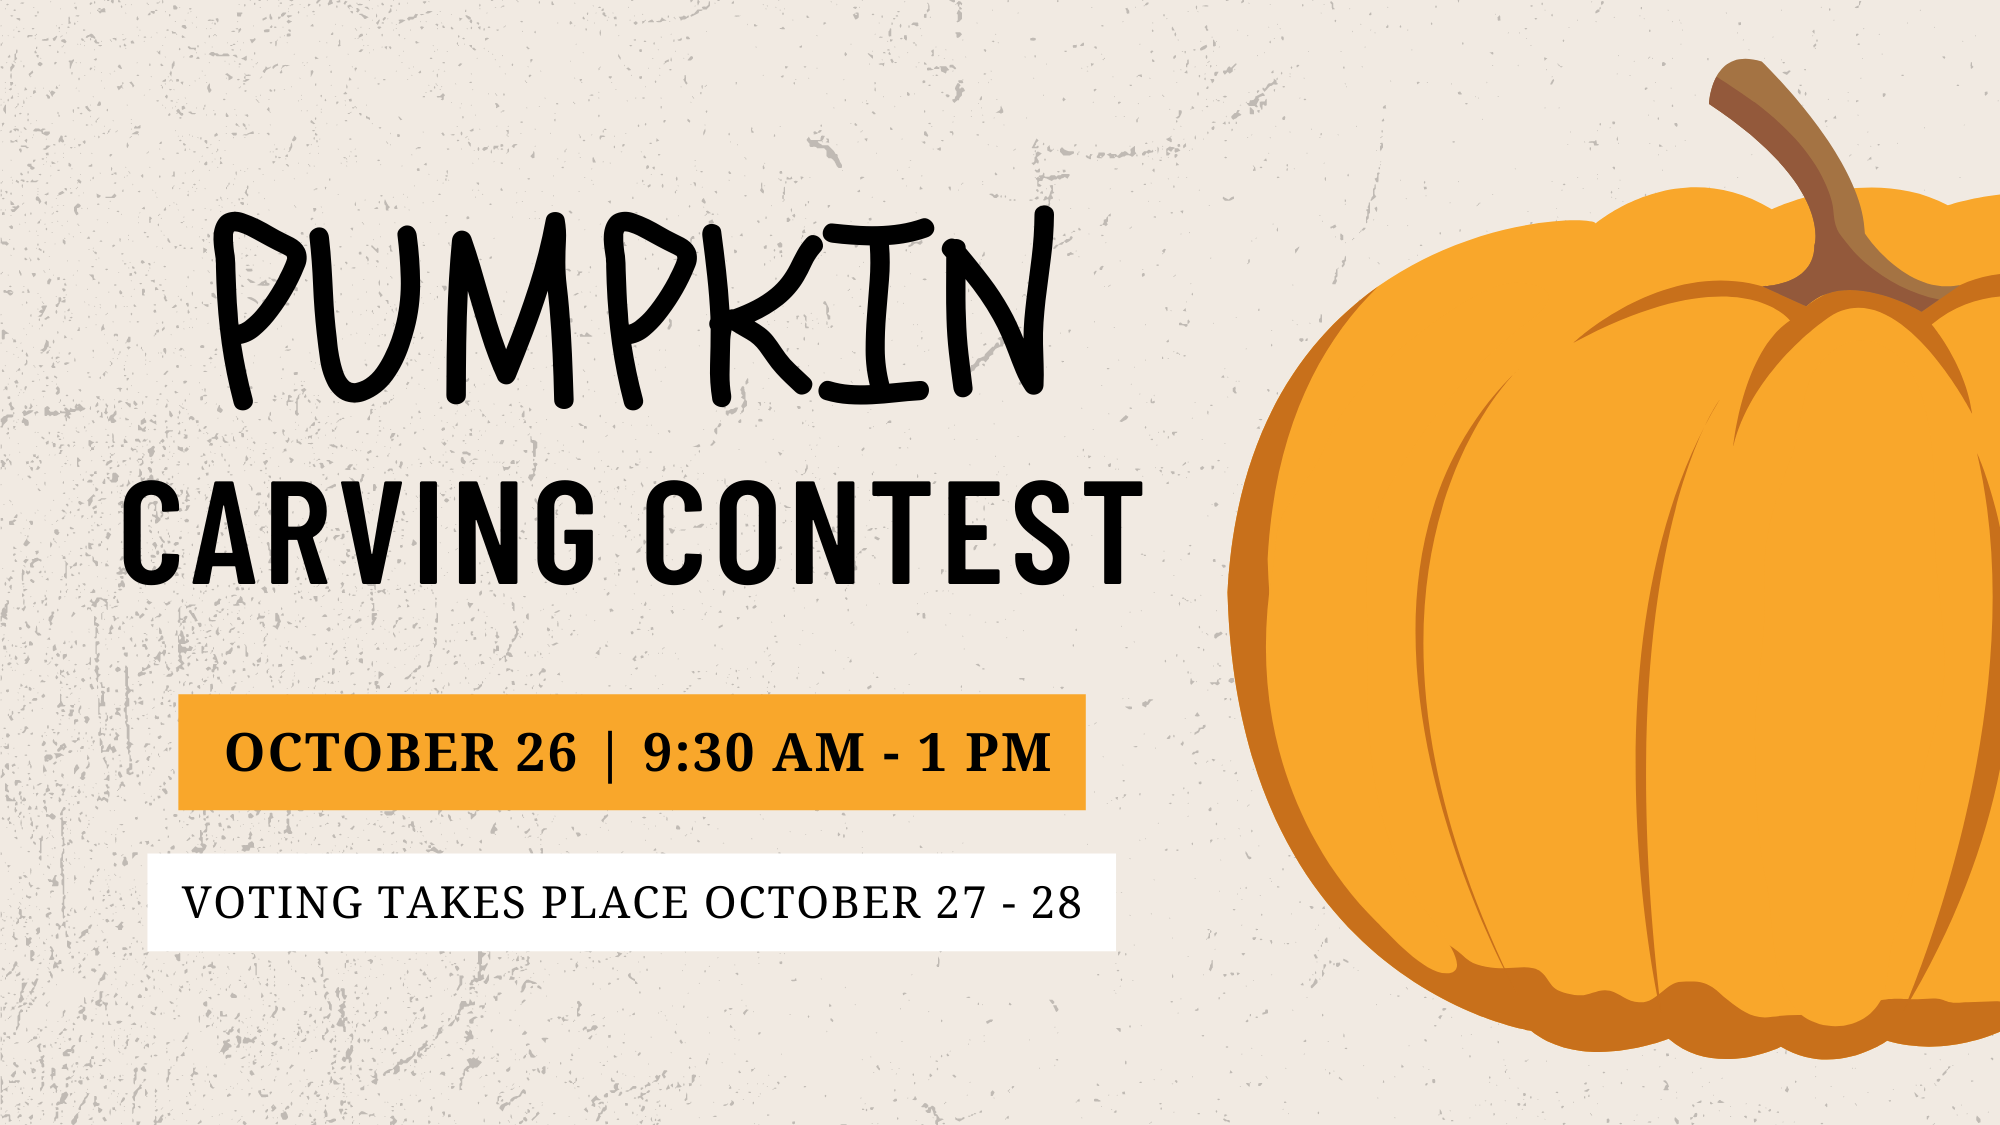 Pumpkin carving contest graphic 